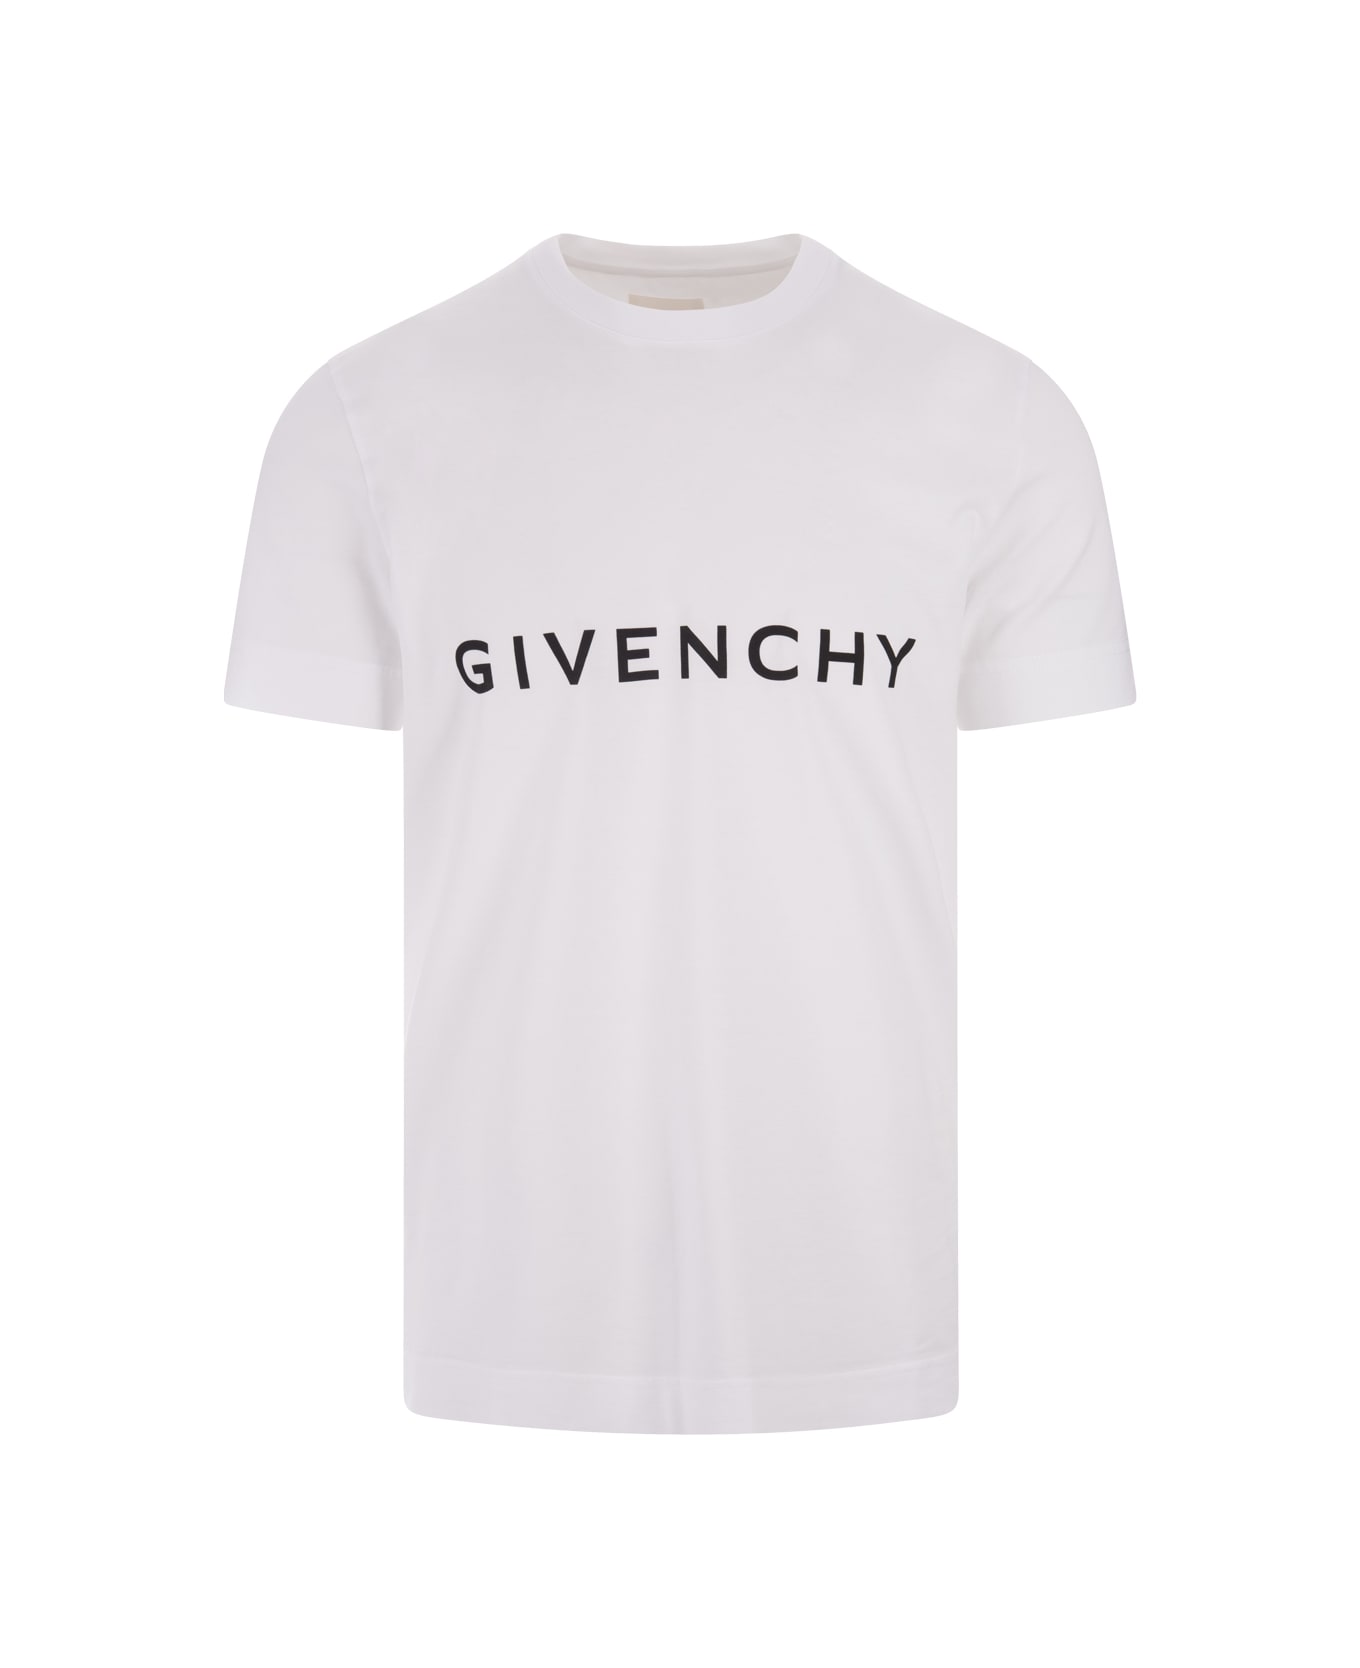 Givenchy White T-shirt With Givenchy Archetype Print On Front - White シャツ